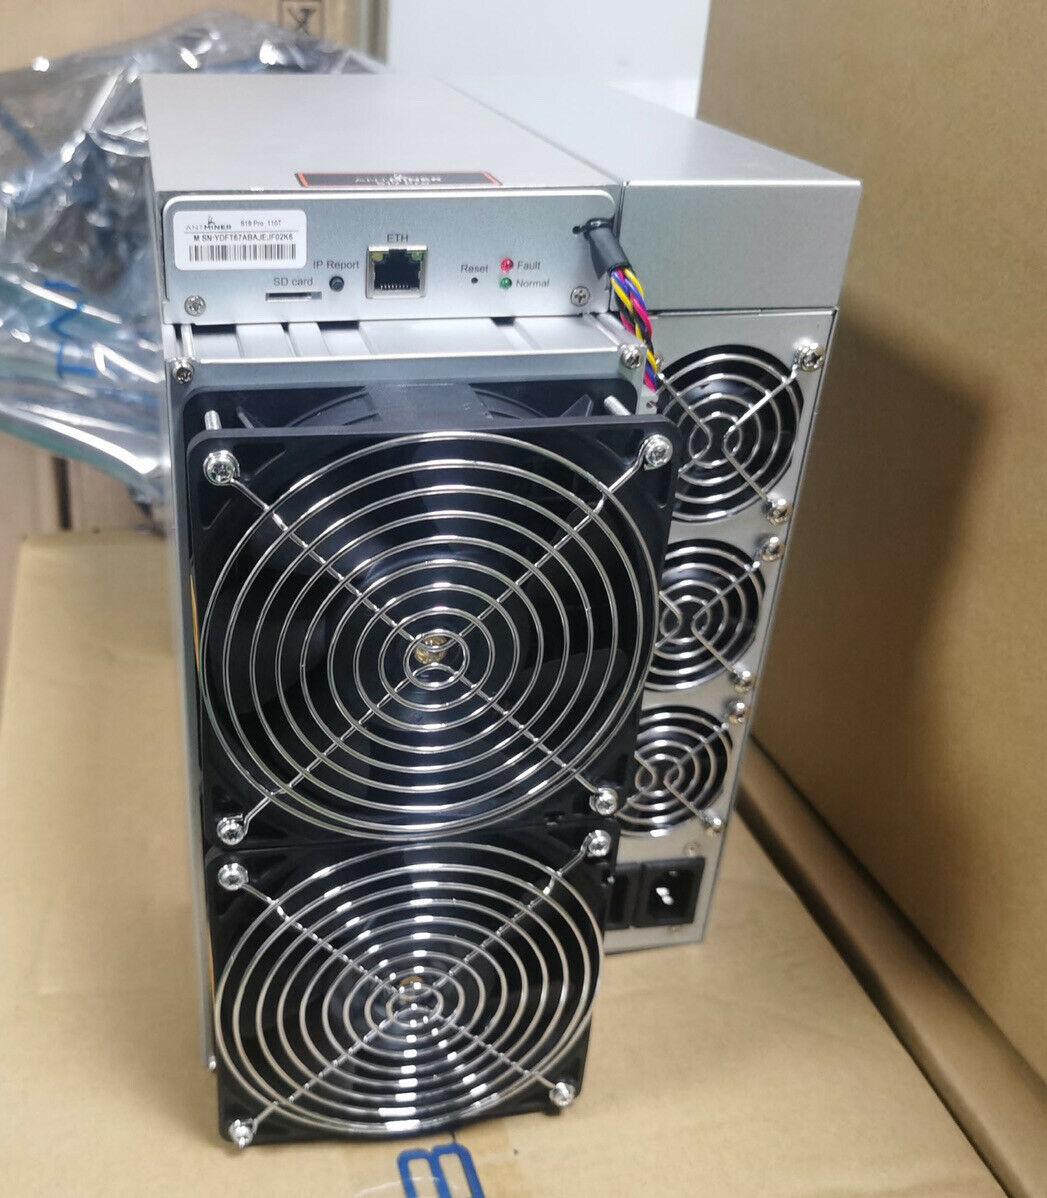 In Stock New Antminer S19 Pro Hashrate 110Th / s, Antminer S19 Hashrate 9